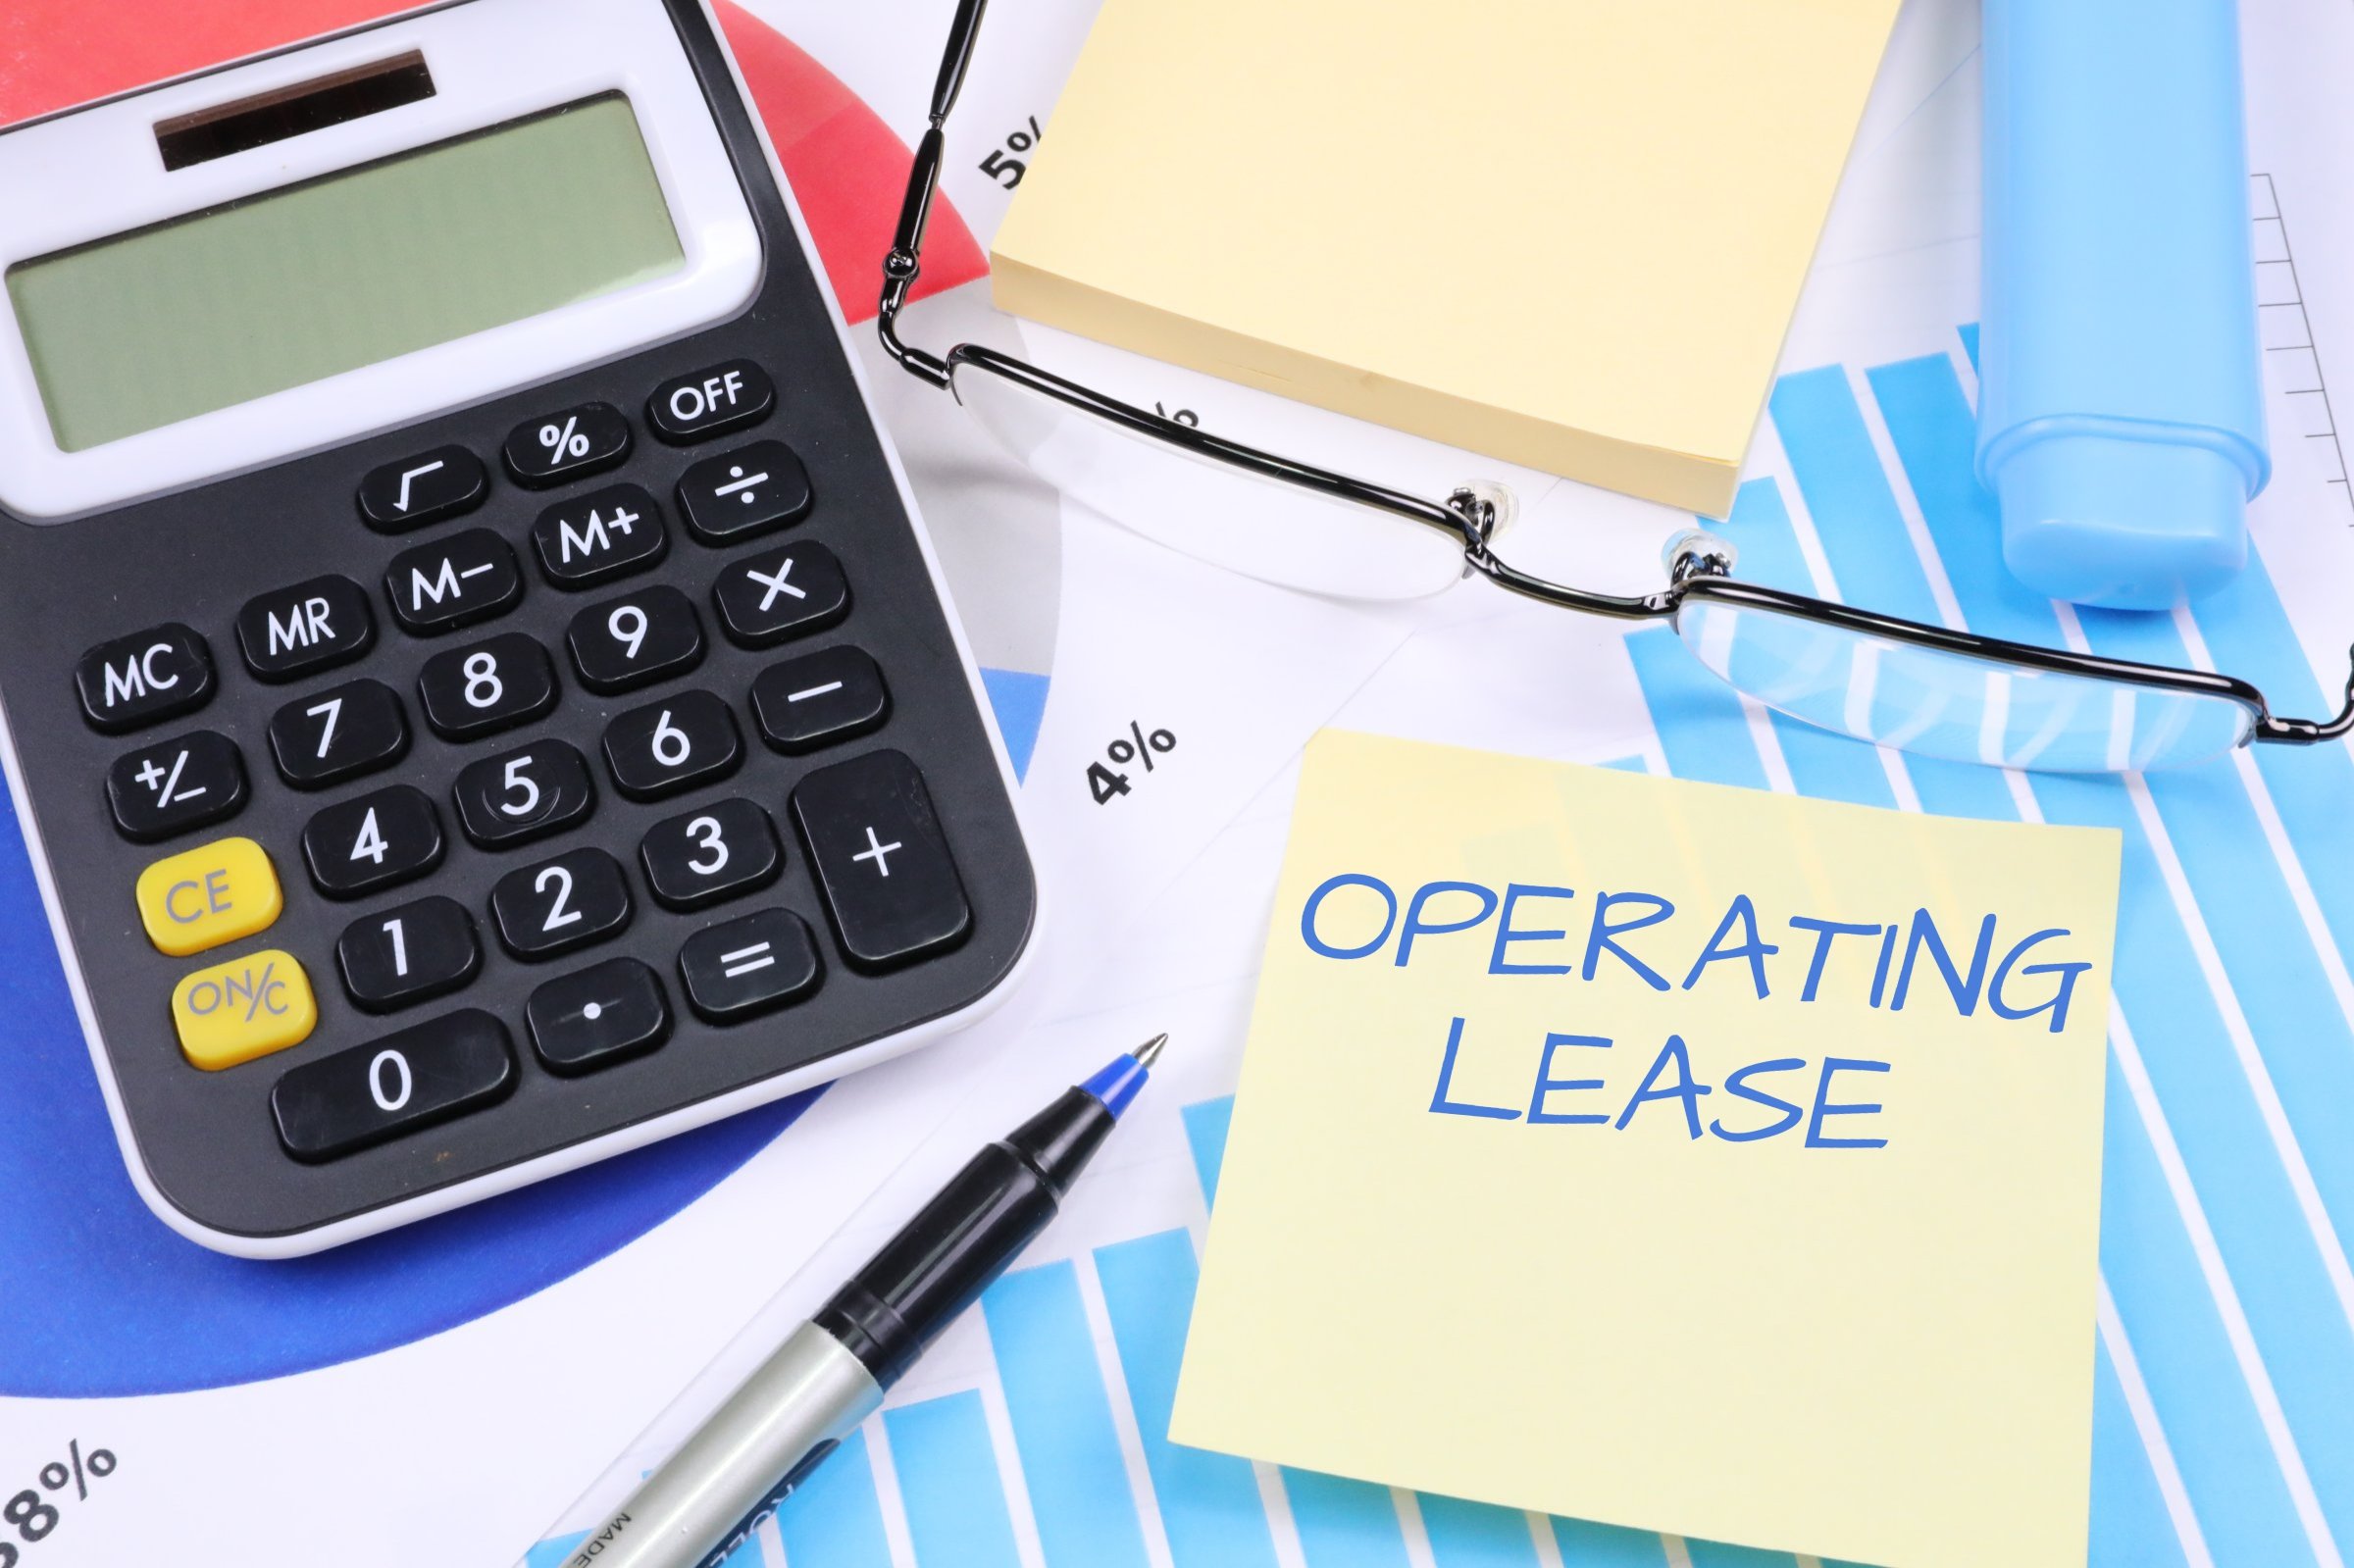 Operating Lease